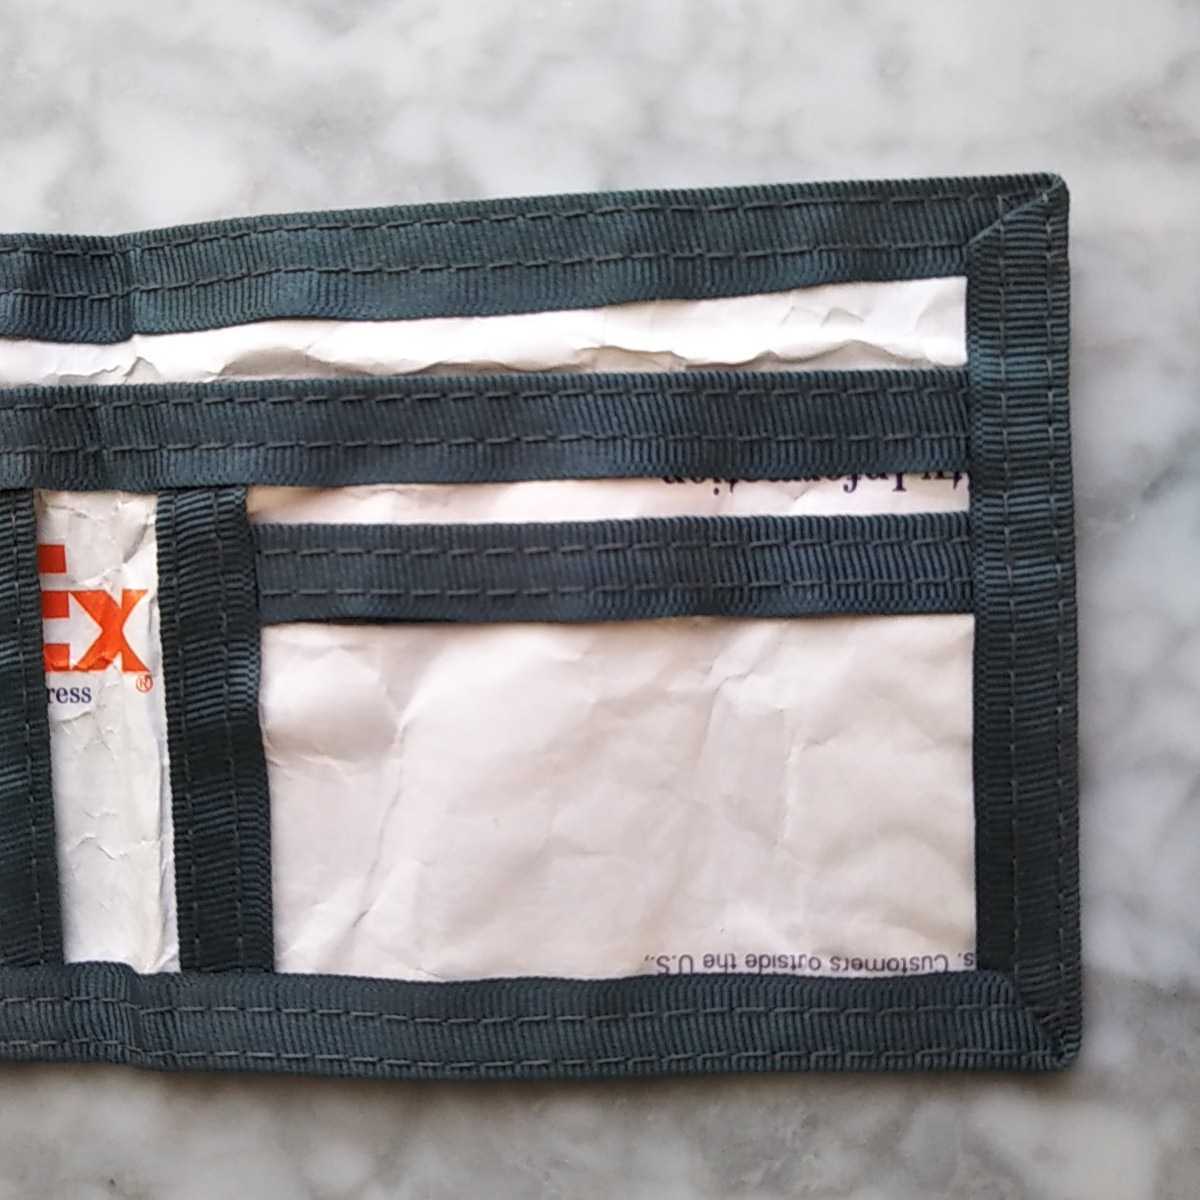 FedEX Thai Beck repeated construction wallet purse fe Dex remake America made 